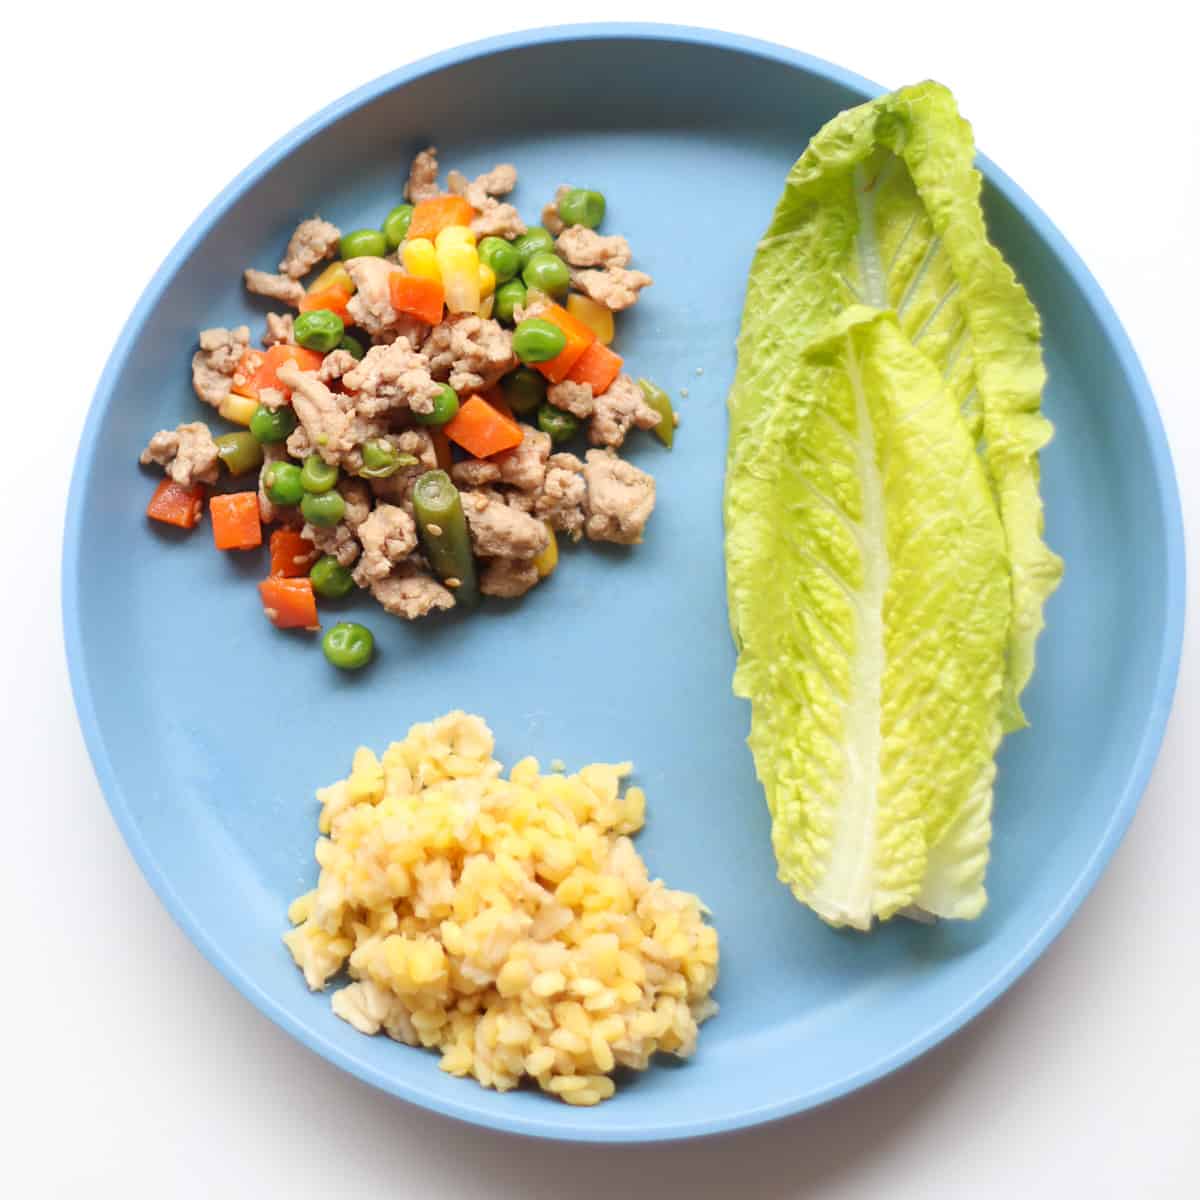 A toddler's plate with a serving of stir fry, rice and leaves of Romaine lettuce separated on a blue plate.